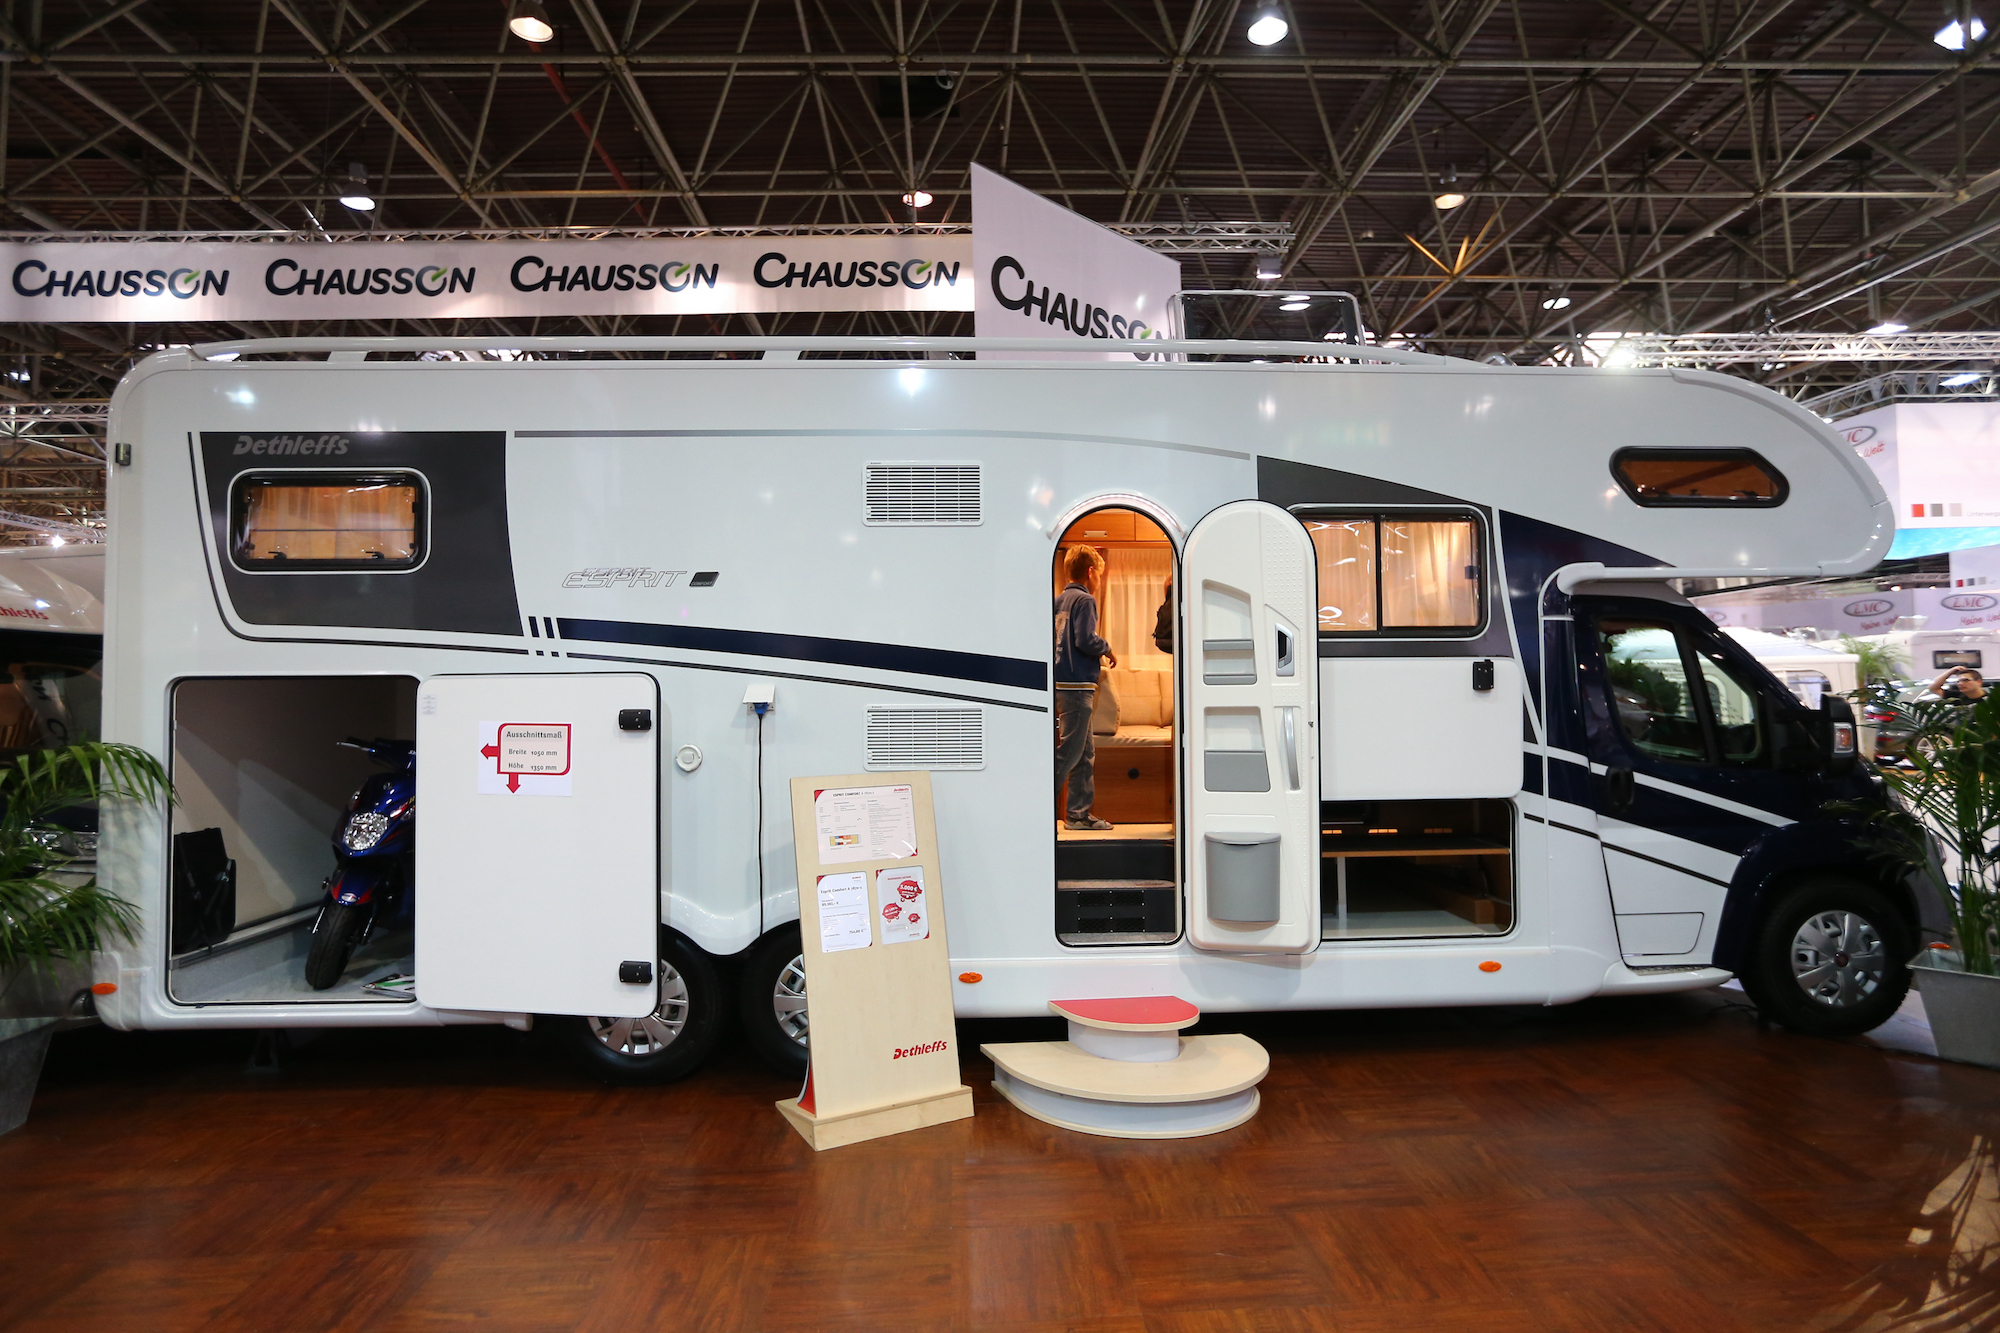 A toy hauler RV motorhome carrying a motorcycle at the Caravan Salon Duesseldorf expo in Duesseldorf, Germany, on September 4, 2014